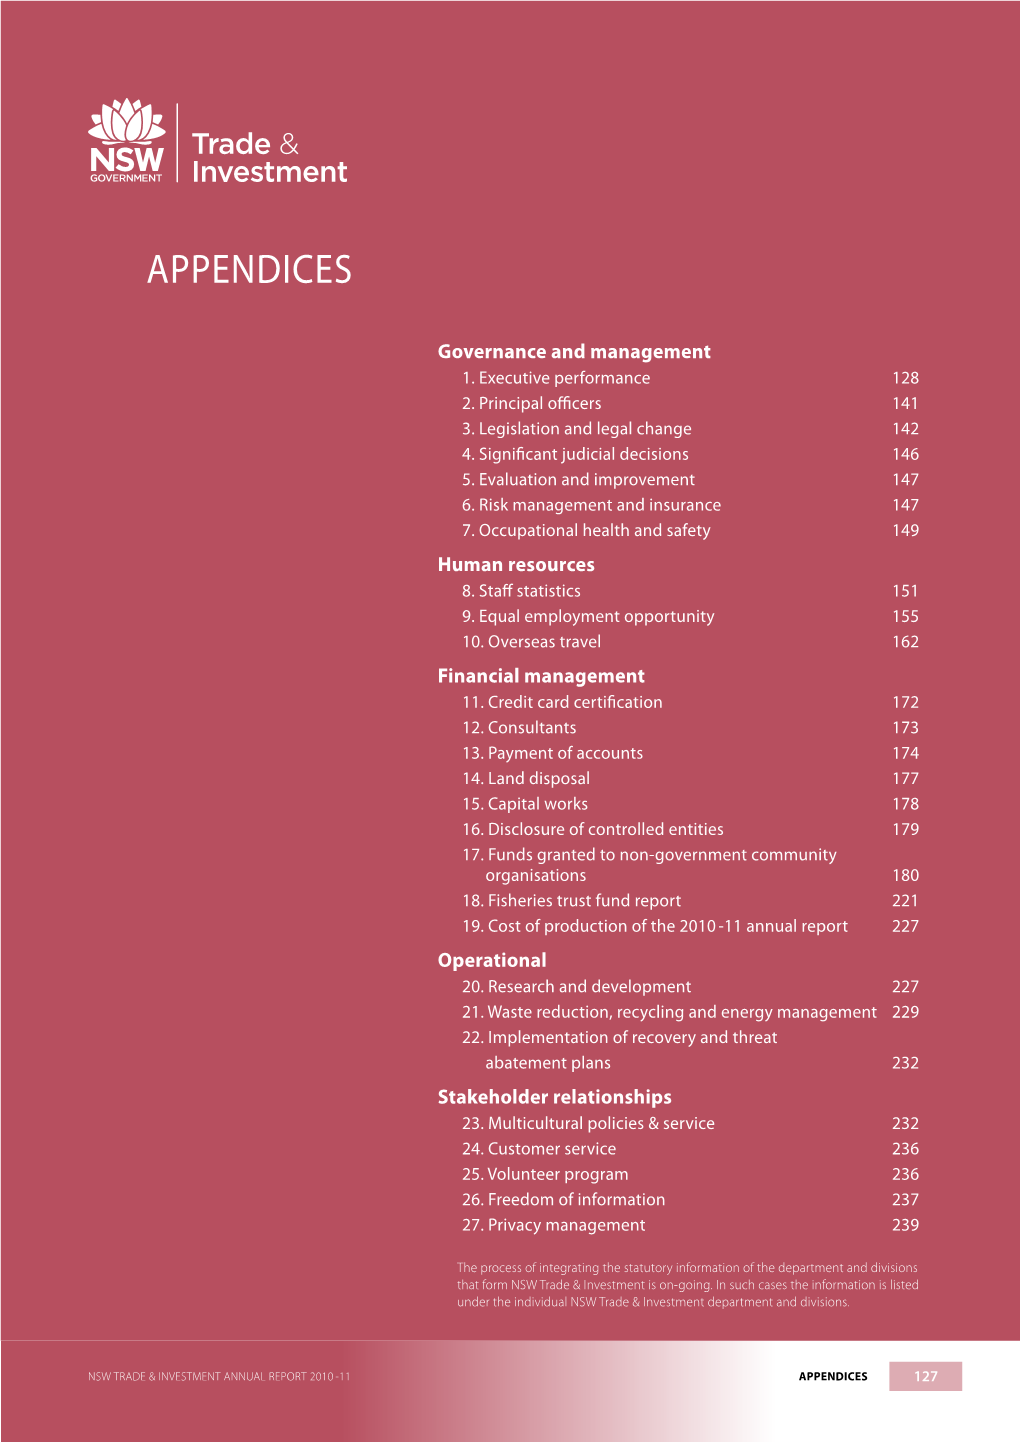 3 TRADE and INVESTMENT ANNUAL REPORT 2010-11 APPENDICES